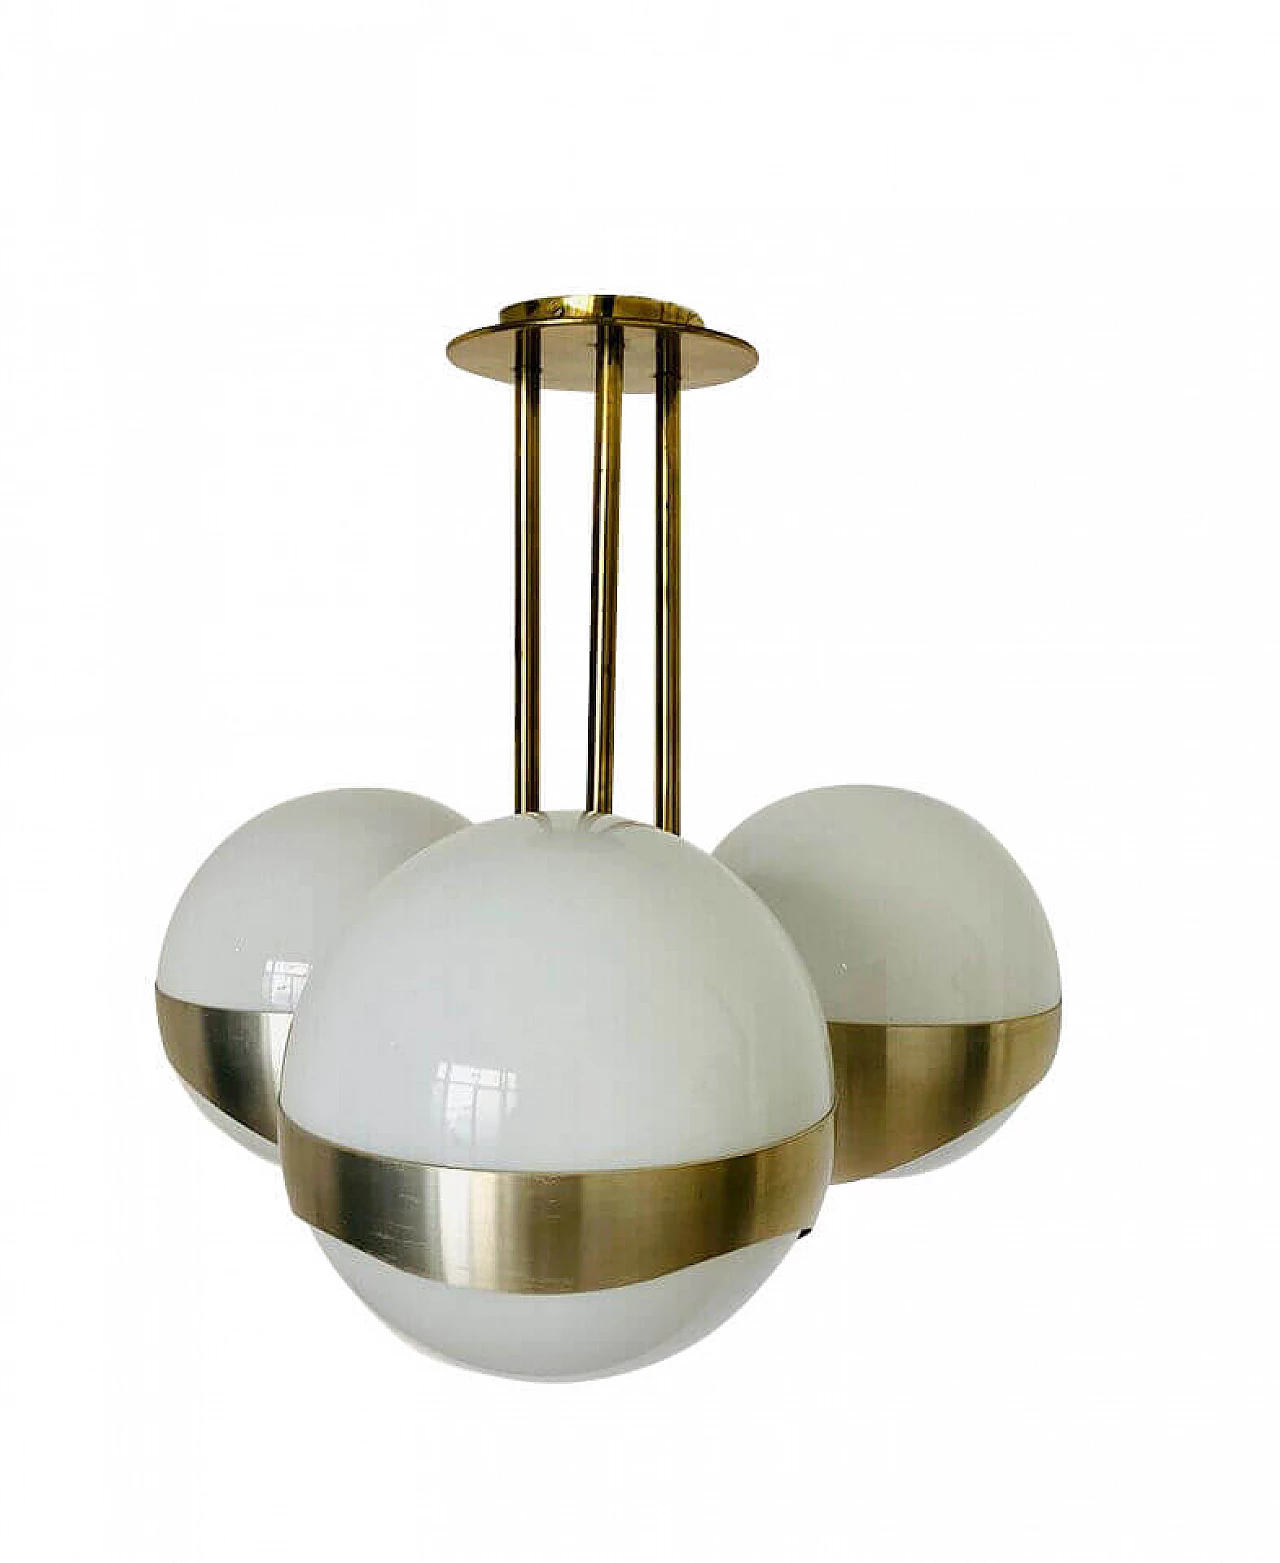 Chandelier with 3 lights, brass and glass, Lamperti, 70s 1079434